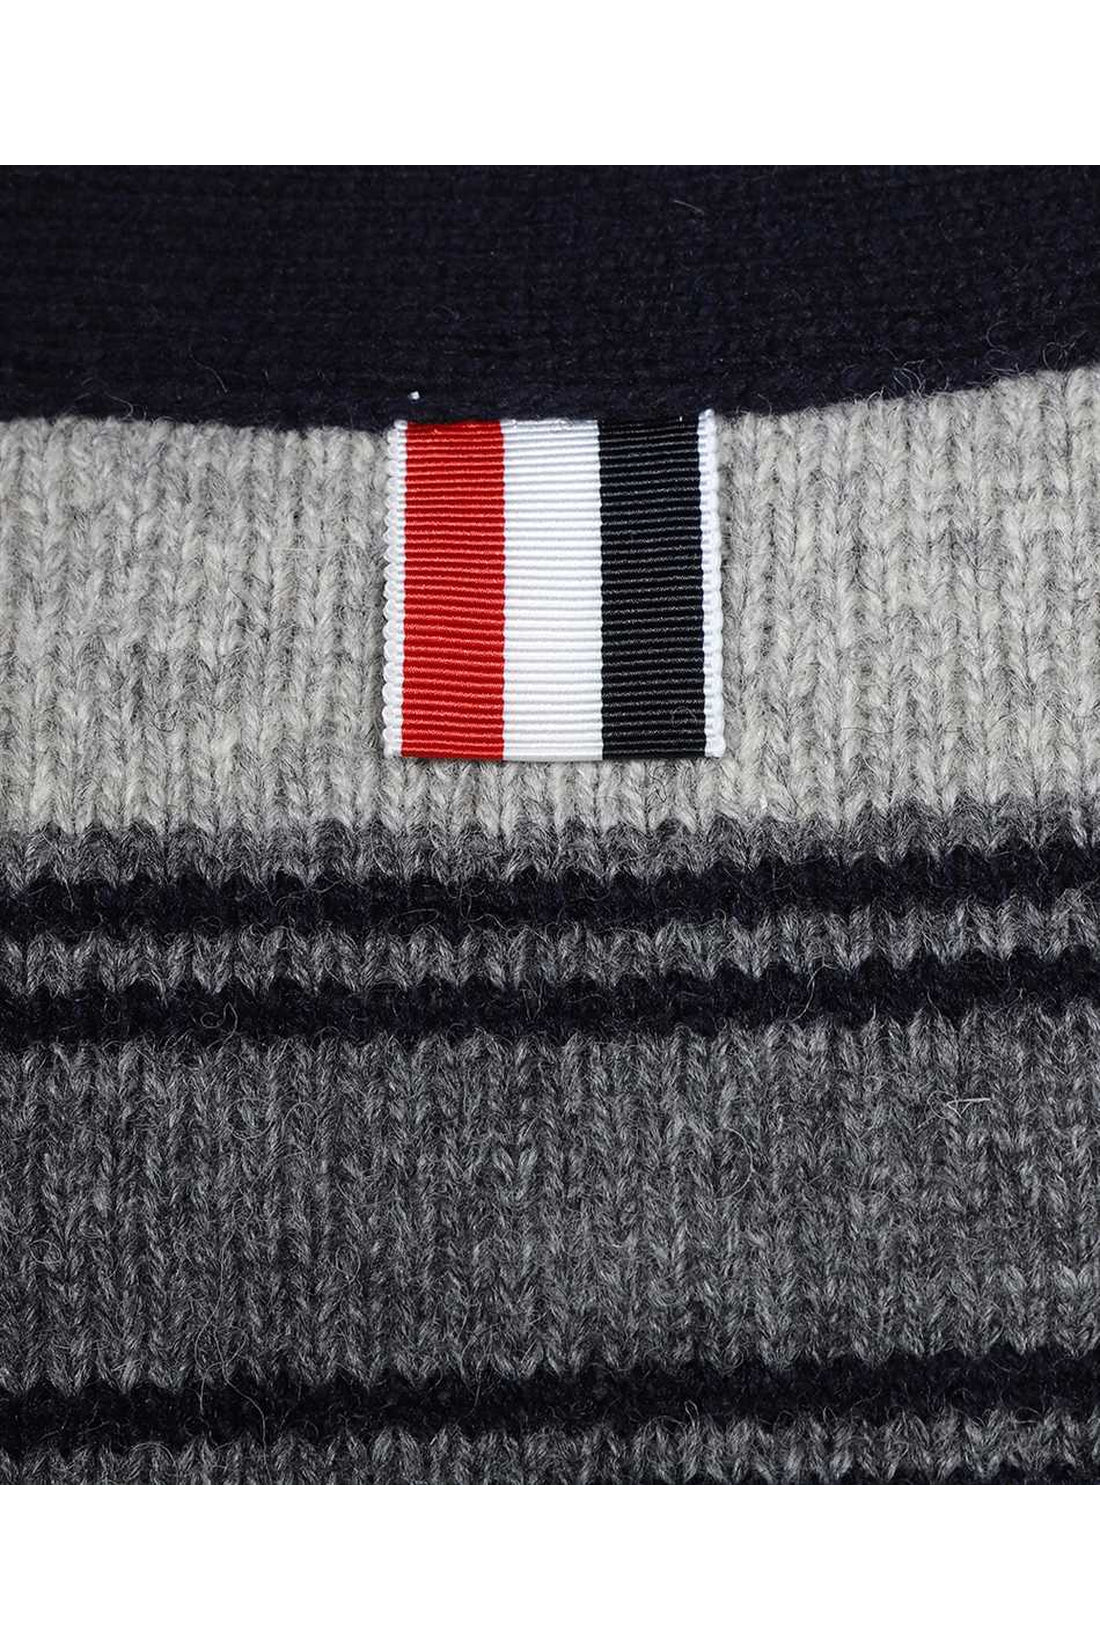 Thom Browne-OUTLET-SALE-Wool cardigan-ARCHIVIST